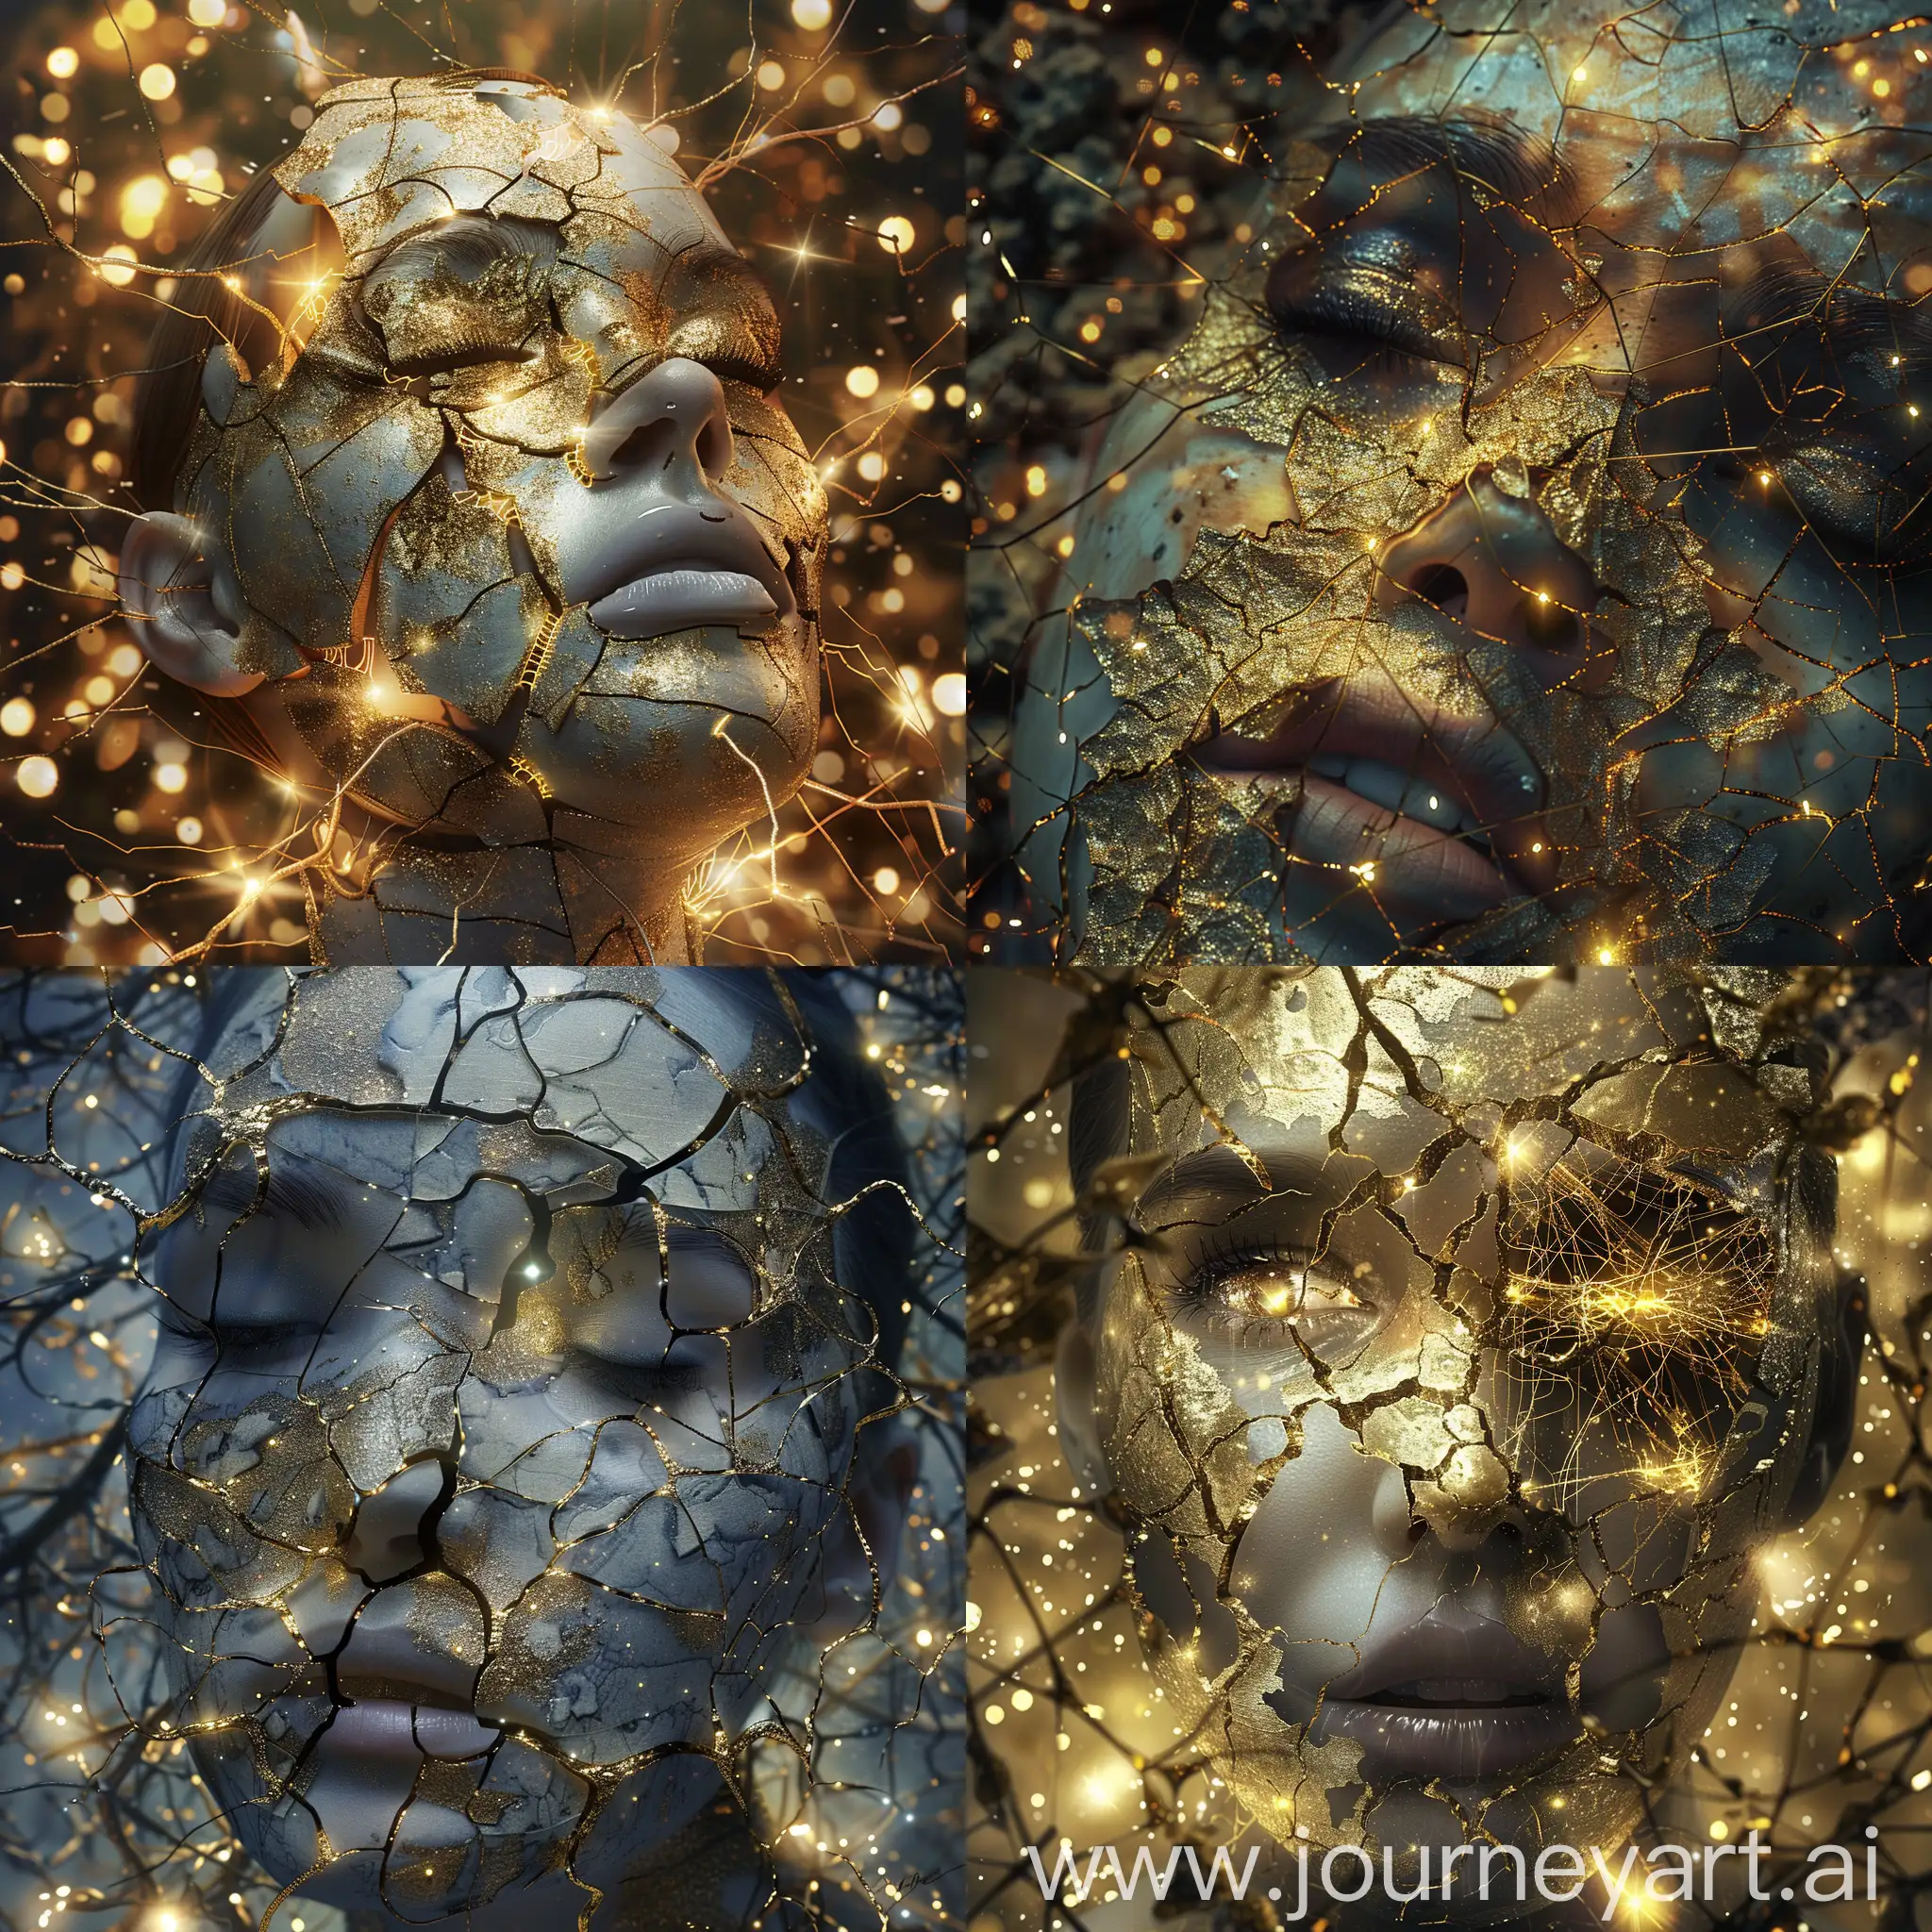 a wonderful breathtaking surreal image of a cracked beautiful female face with golden repairings with shiny golden dendritic glue among the cracks of the face, ultradetailed image, hyperdetailed golden , sparkling illuminated background, depiction of thebritle nature of beeing human, fragile atmosphere